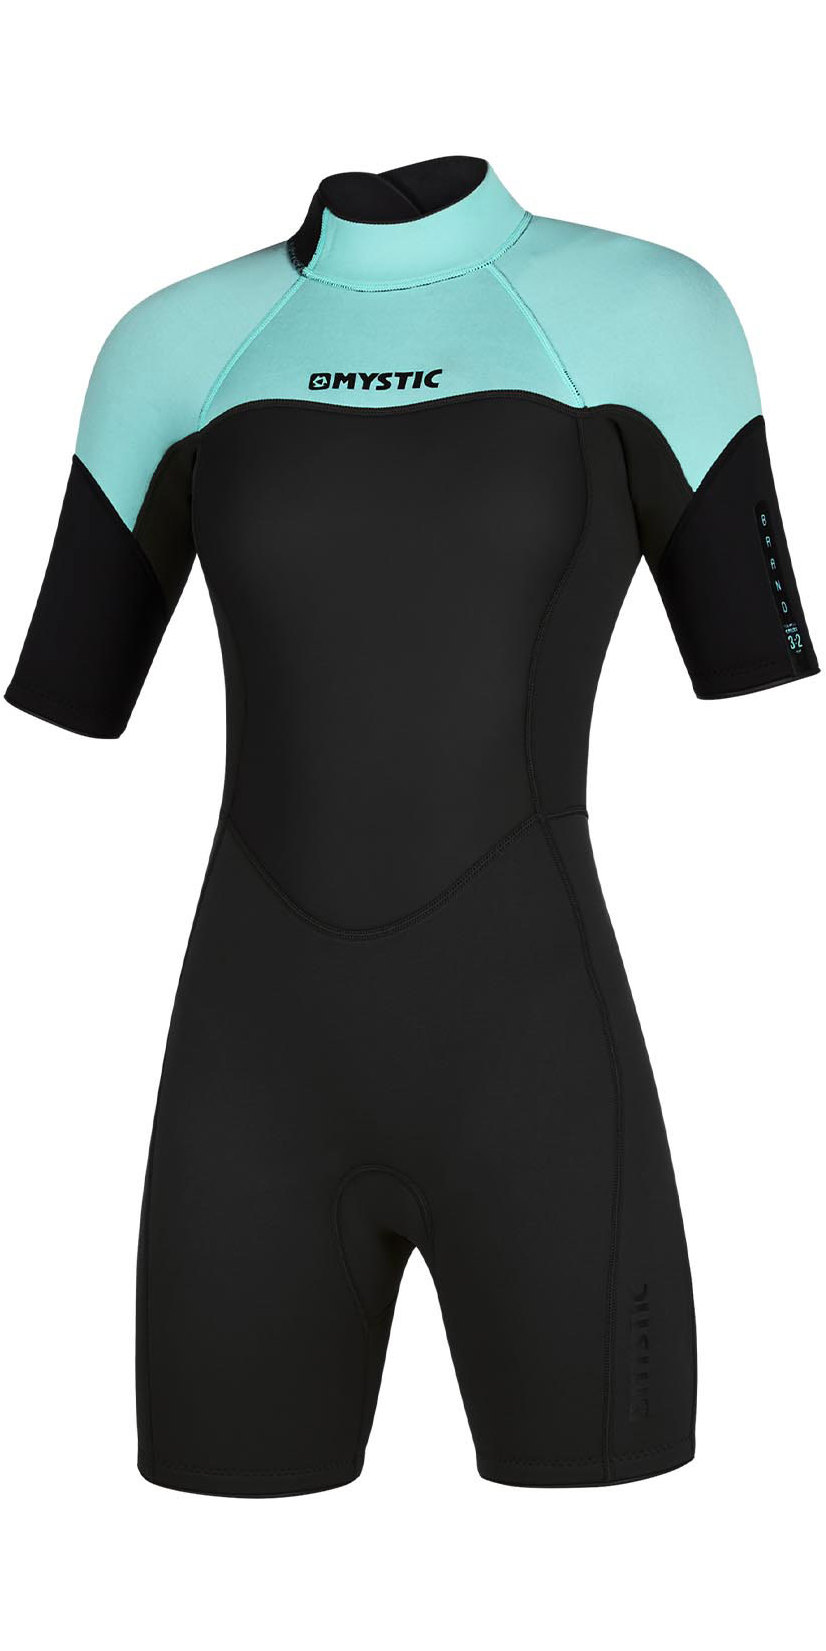 2021 Mystic Womens 3/2mm Zip Shorty Wetsuit 200084 - Mint Green Wetsuits | Watersports Outlet